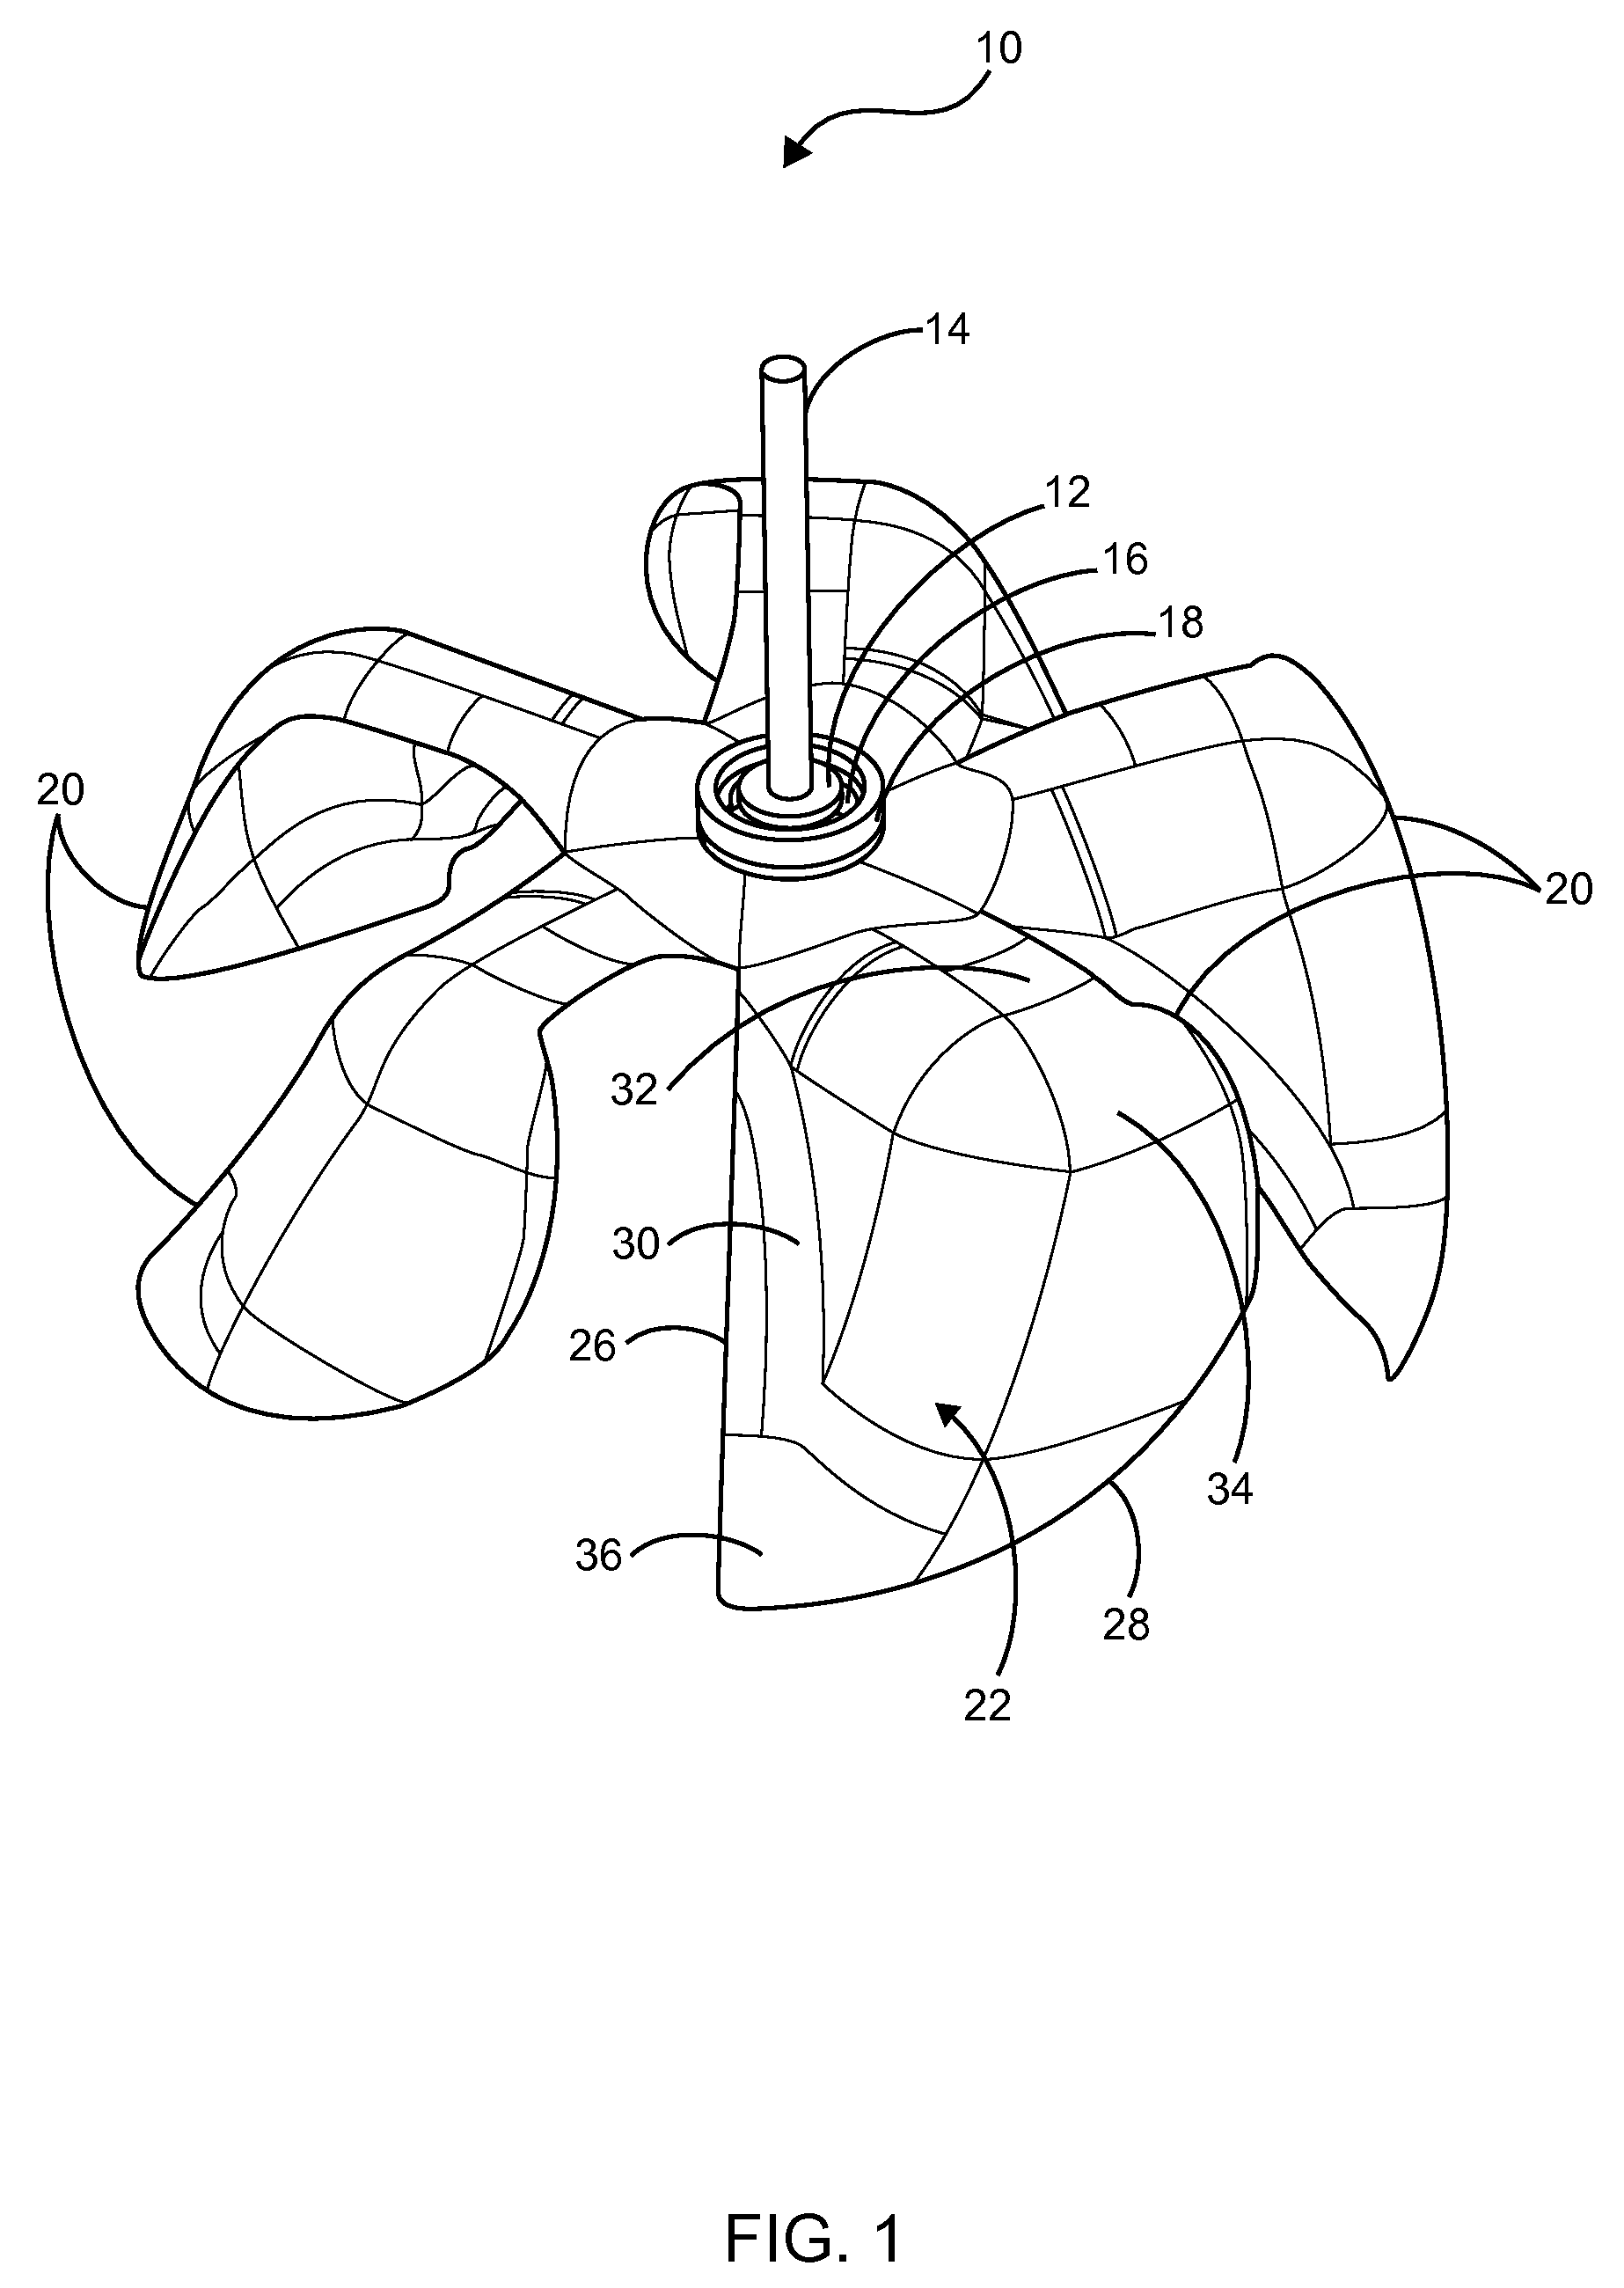 Uni-directional axial turbine blade assembly